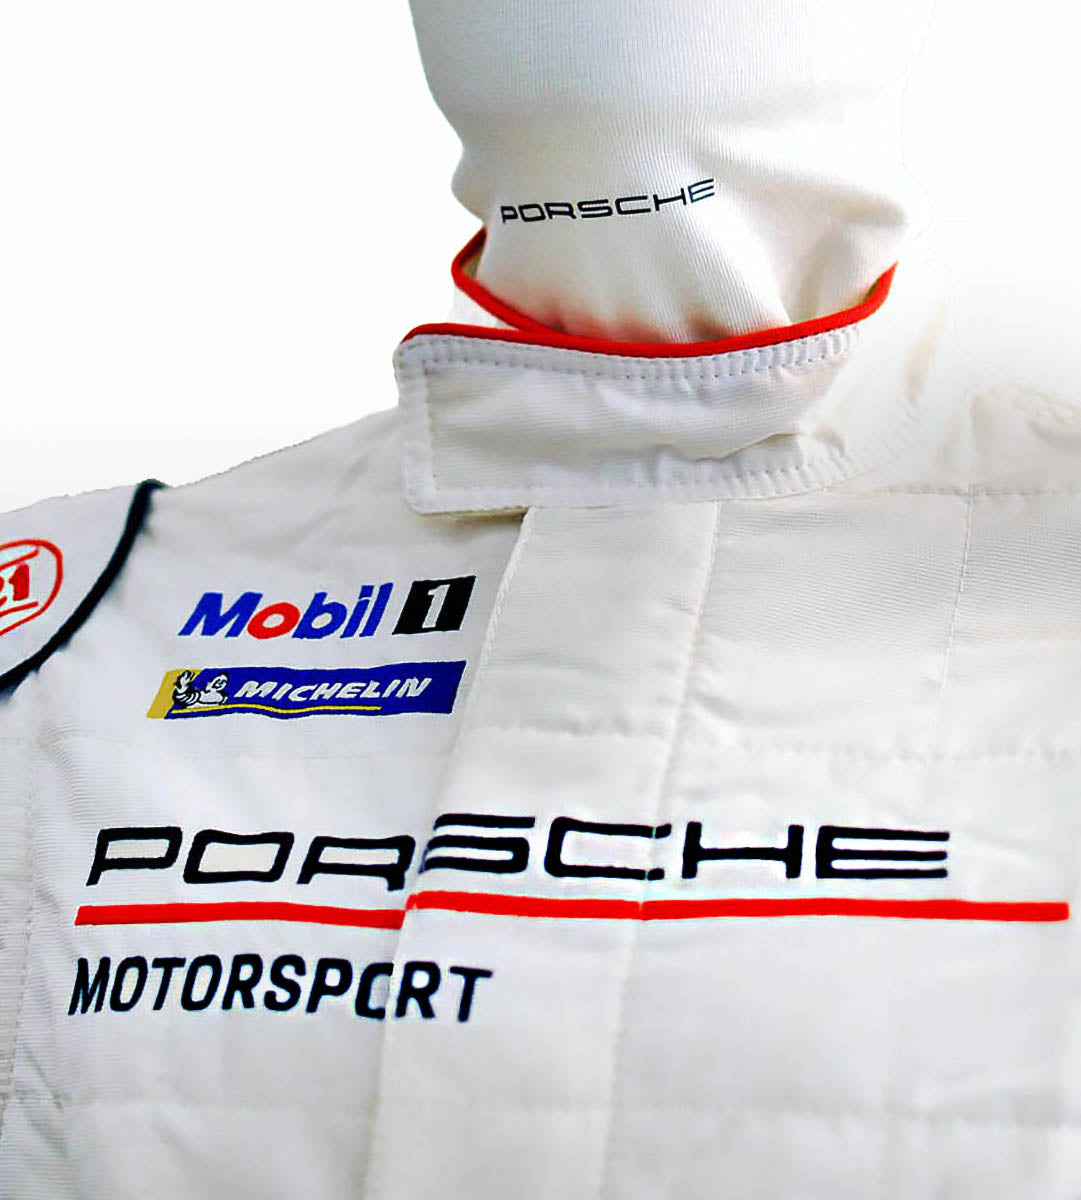 Stand 21 Porsche Motorsport ST221 Air driver race suit lowest price with discount for the best deal review image